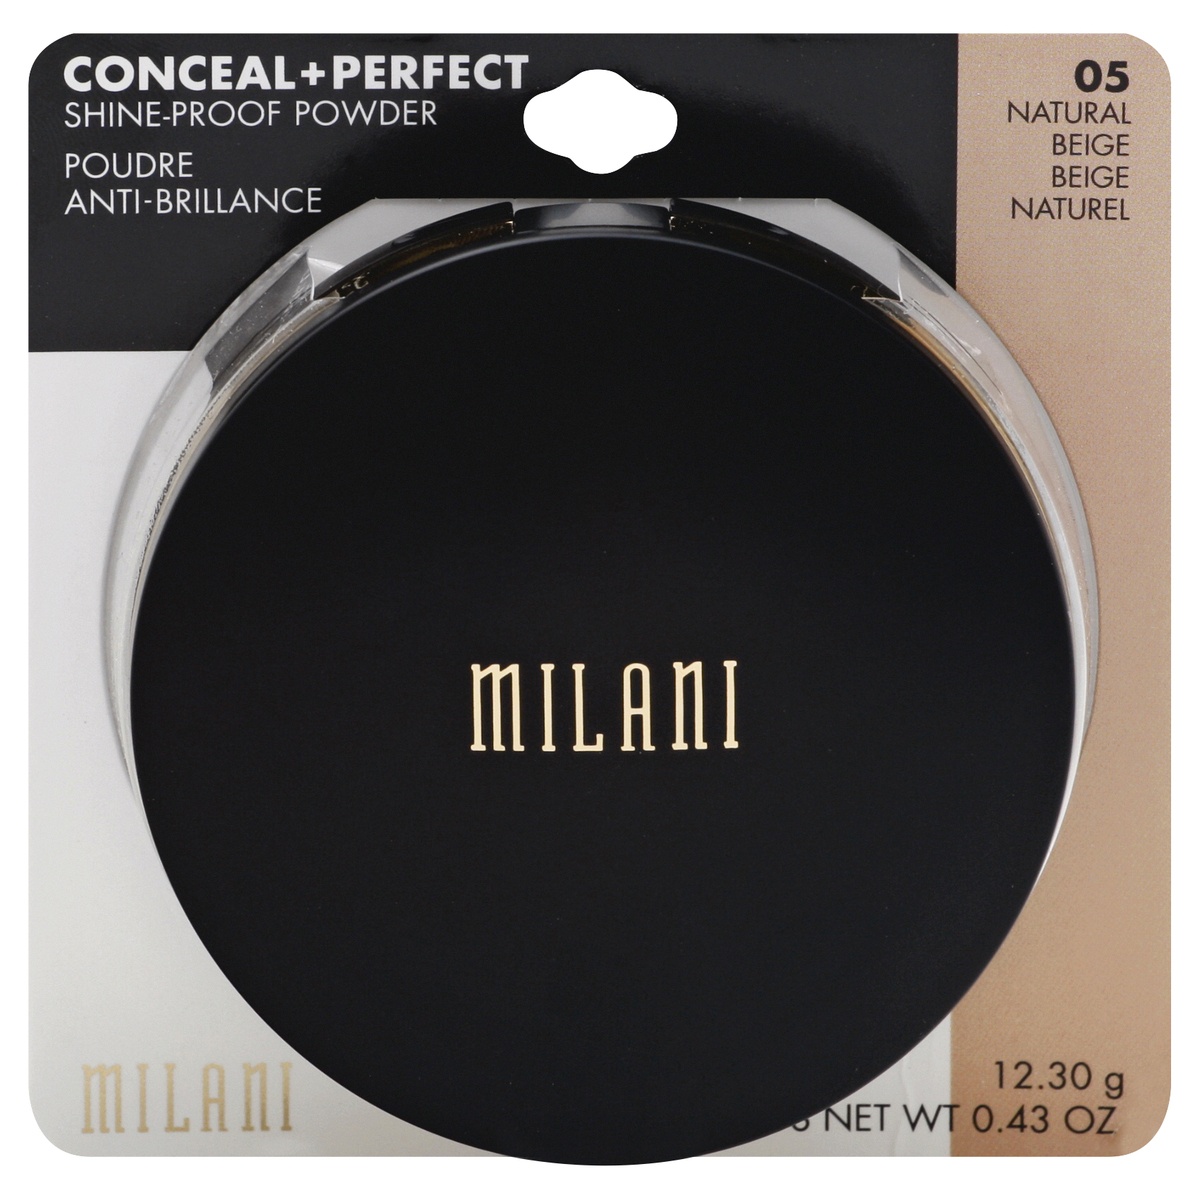 slide 1 of 2, Milani Conceal+Perfect Shine-Proof Powder Natural Beige, 0.42 oz